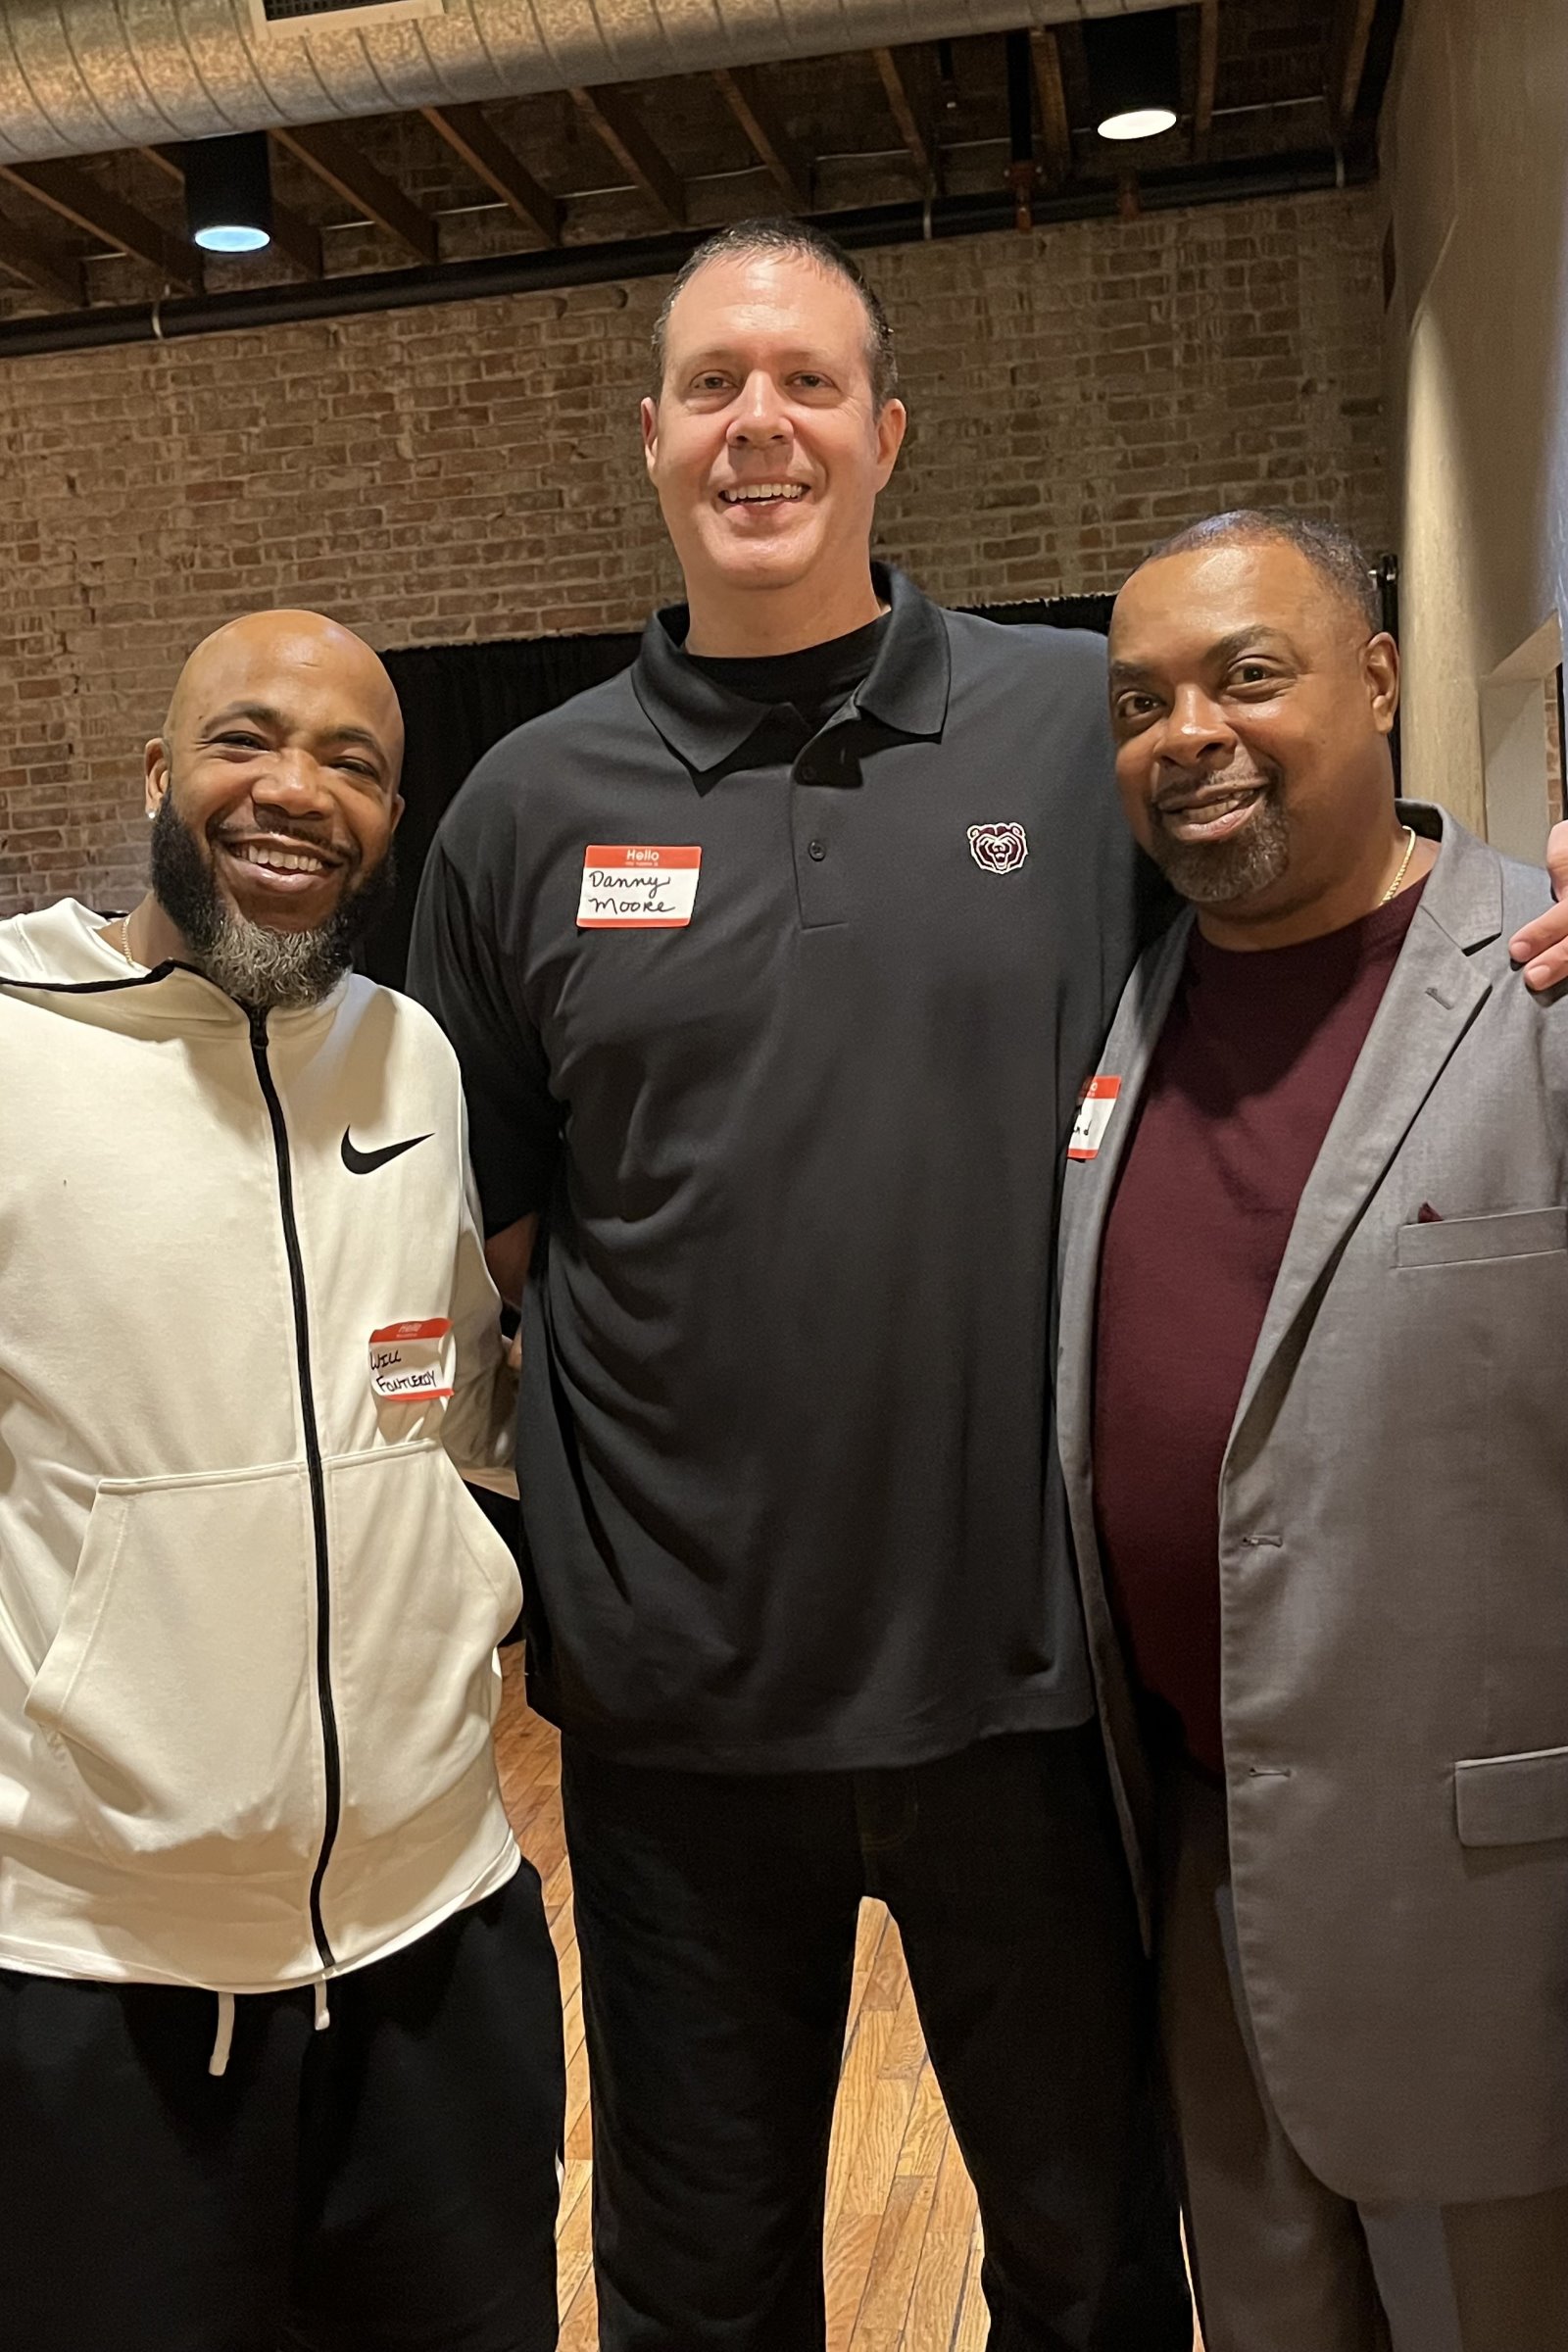 Danny Moore, middle, poses for a photo with former Missouri State teammate William Fontleroy, left, and Bears great Winston Garland